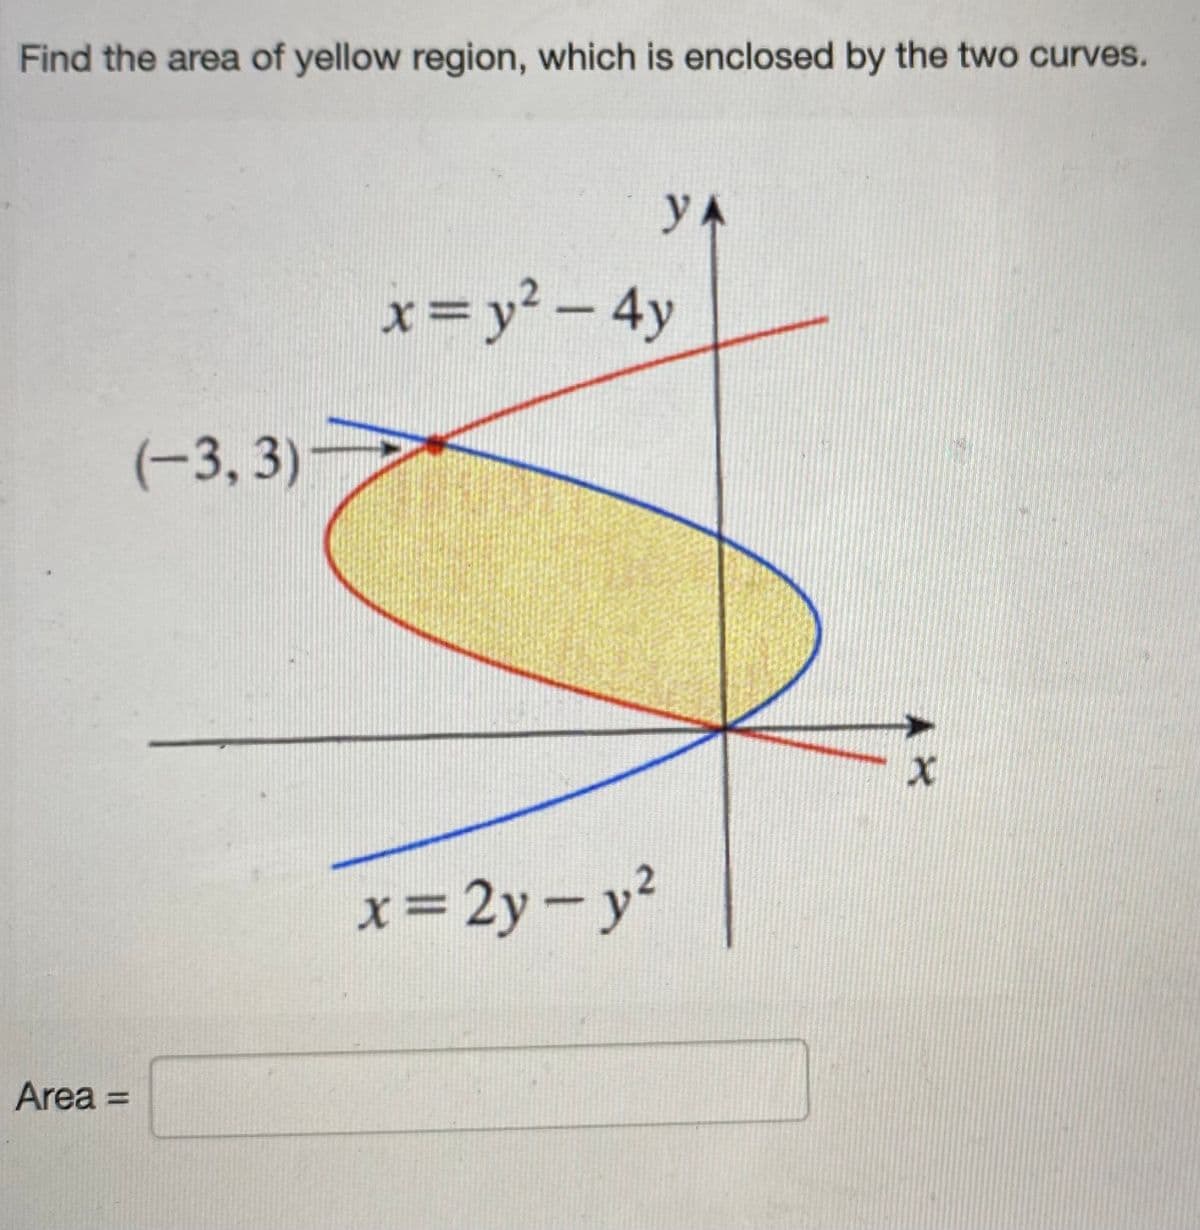 Find the area of yellow region, which is enclosed by the two curves.
yA
x=y² - 4y
%3D
(-3,3)
x= 2y- y?
Area =
